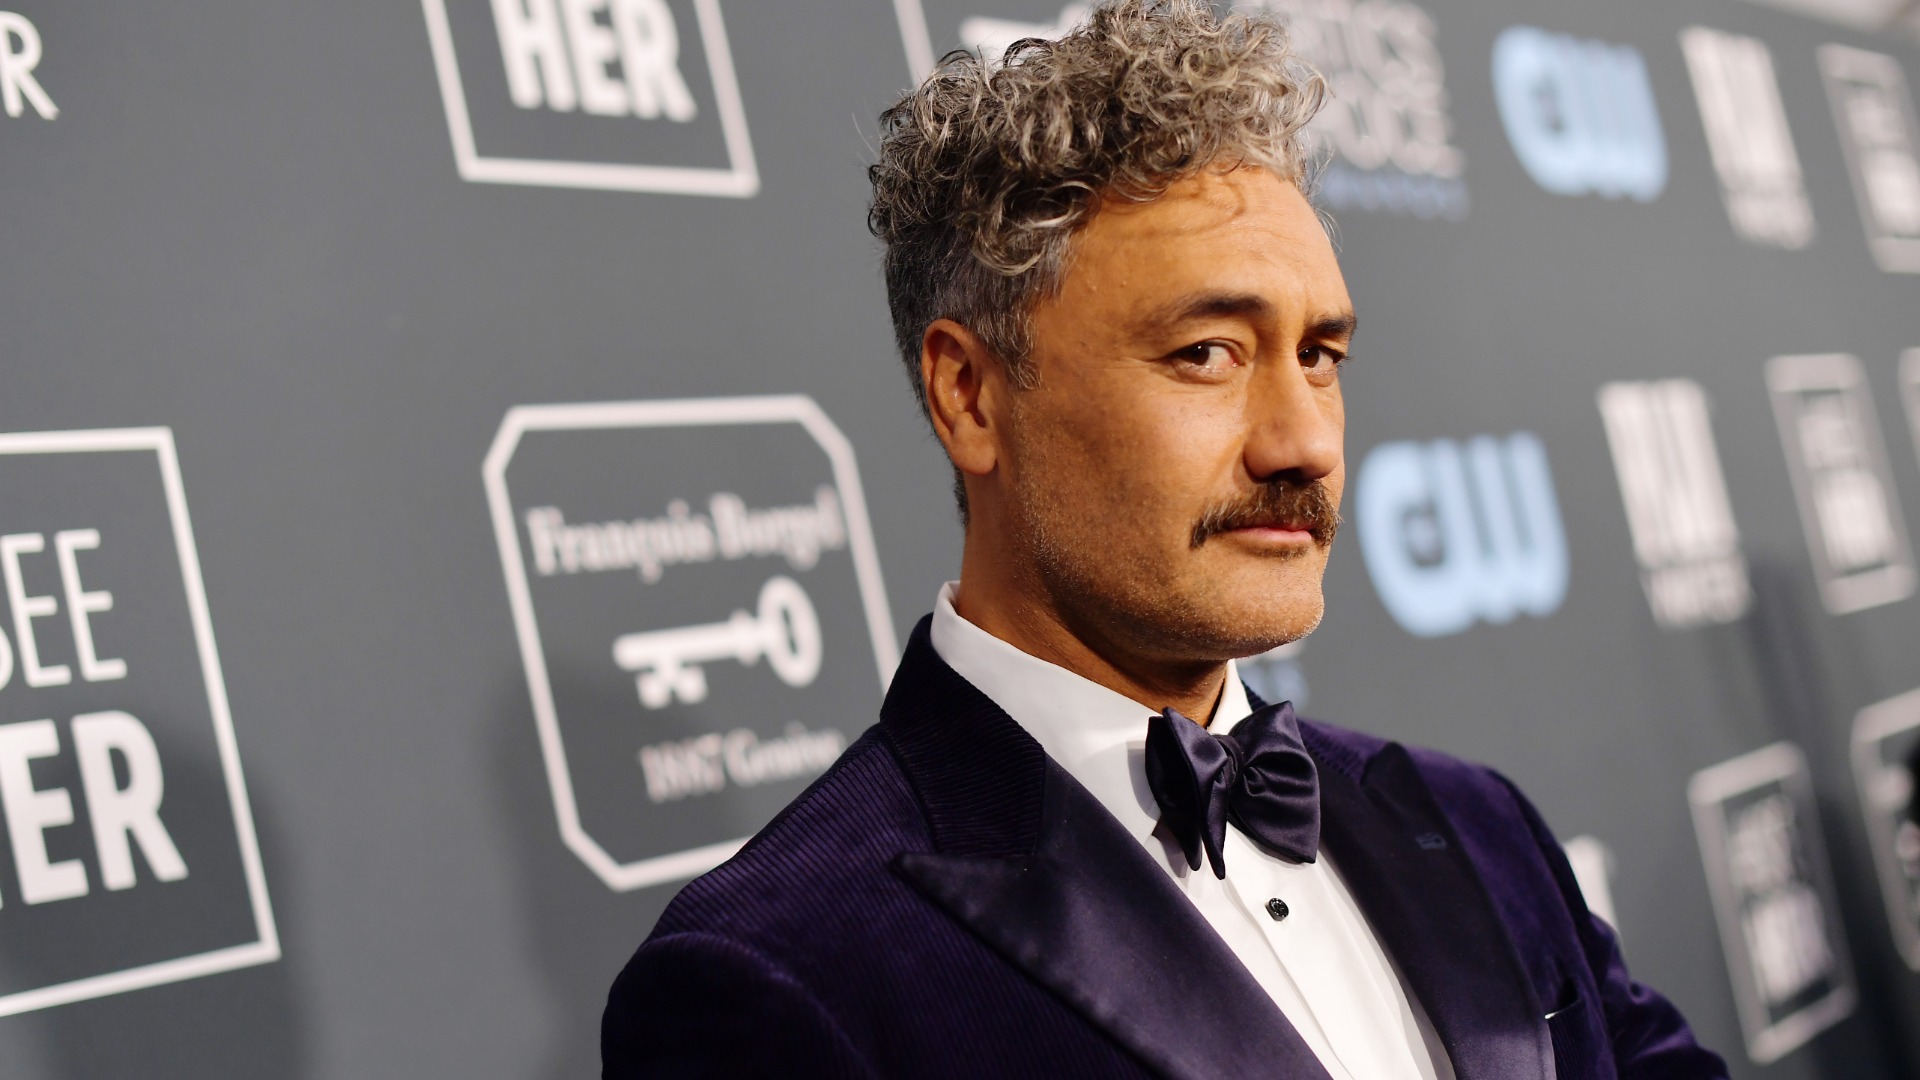 Taika Waititi talks his Star Wars movie: “I would like to take something new and create some new characters”